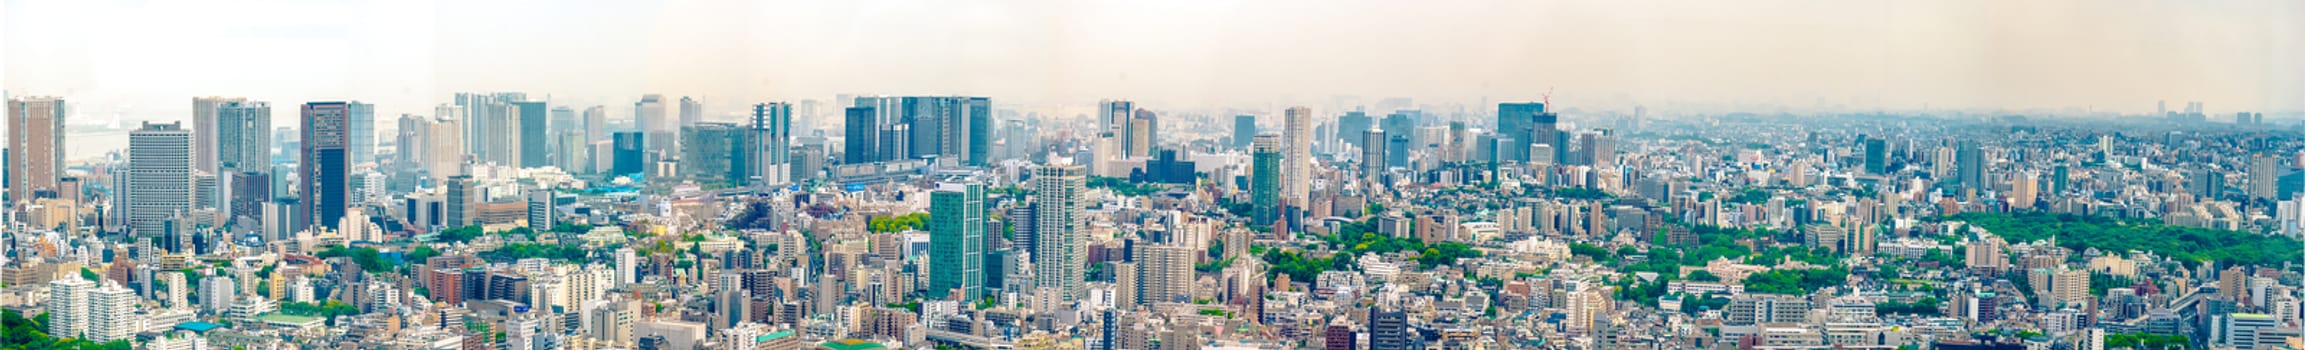 Panorama of the business district of Tokyo city from the Mori Tower